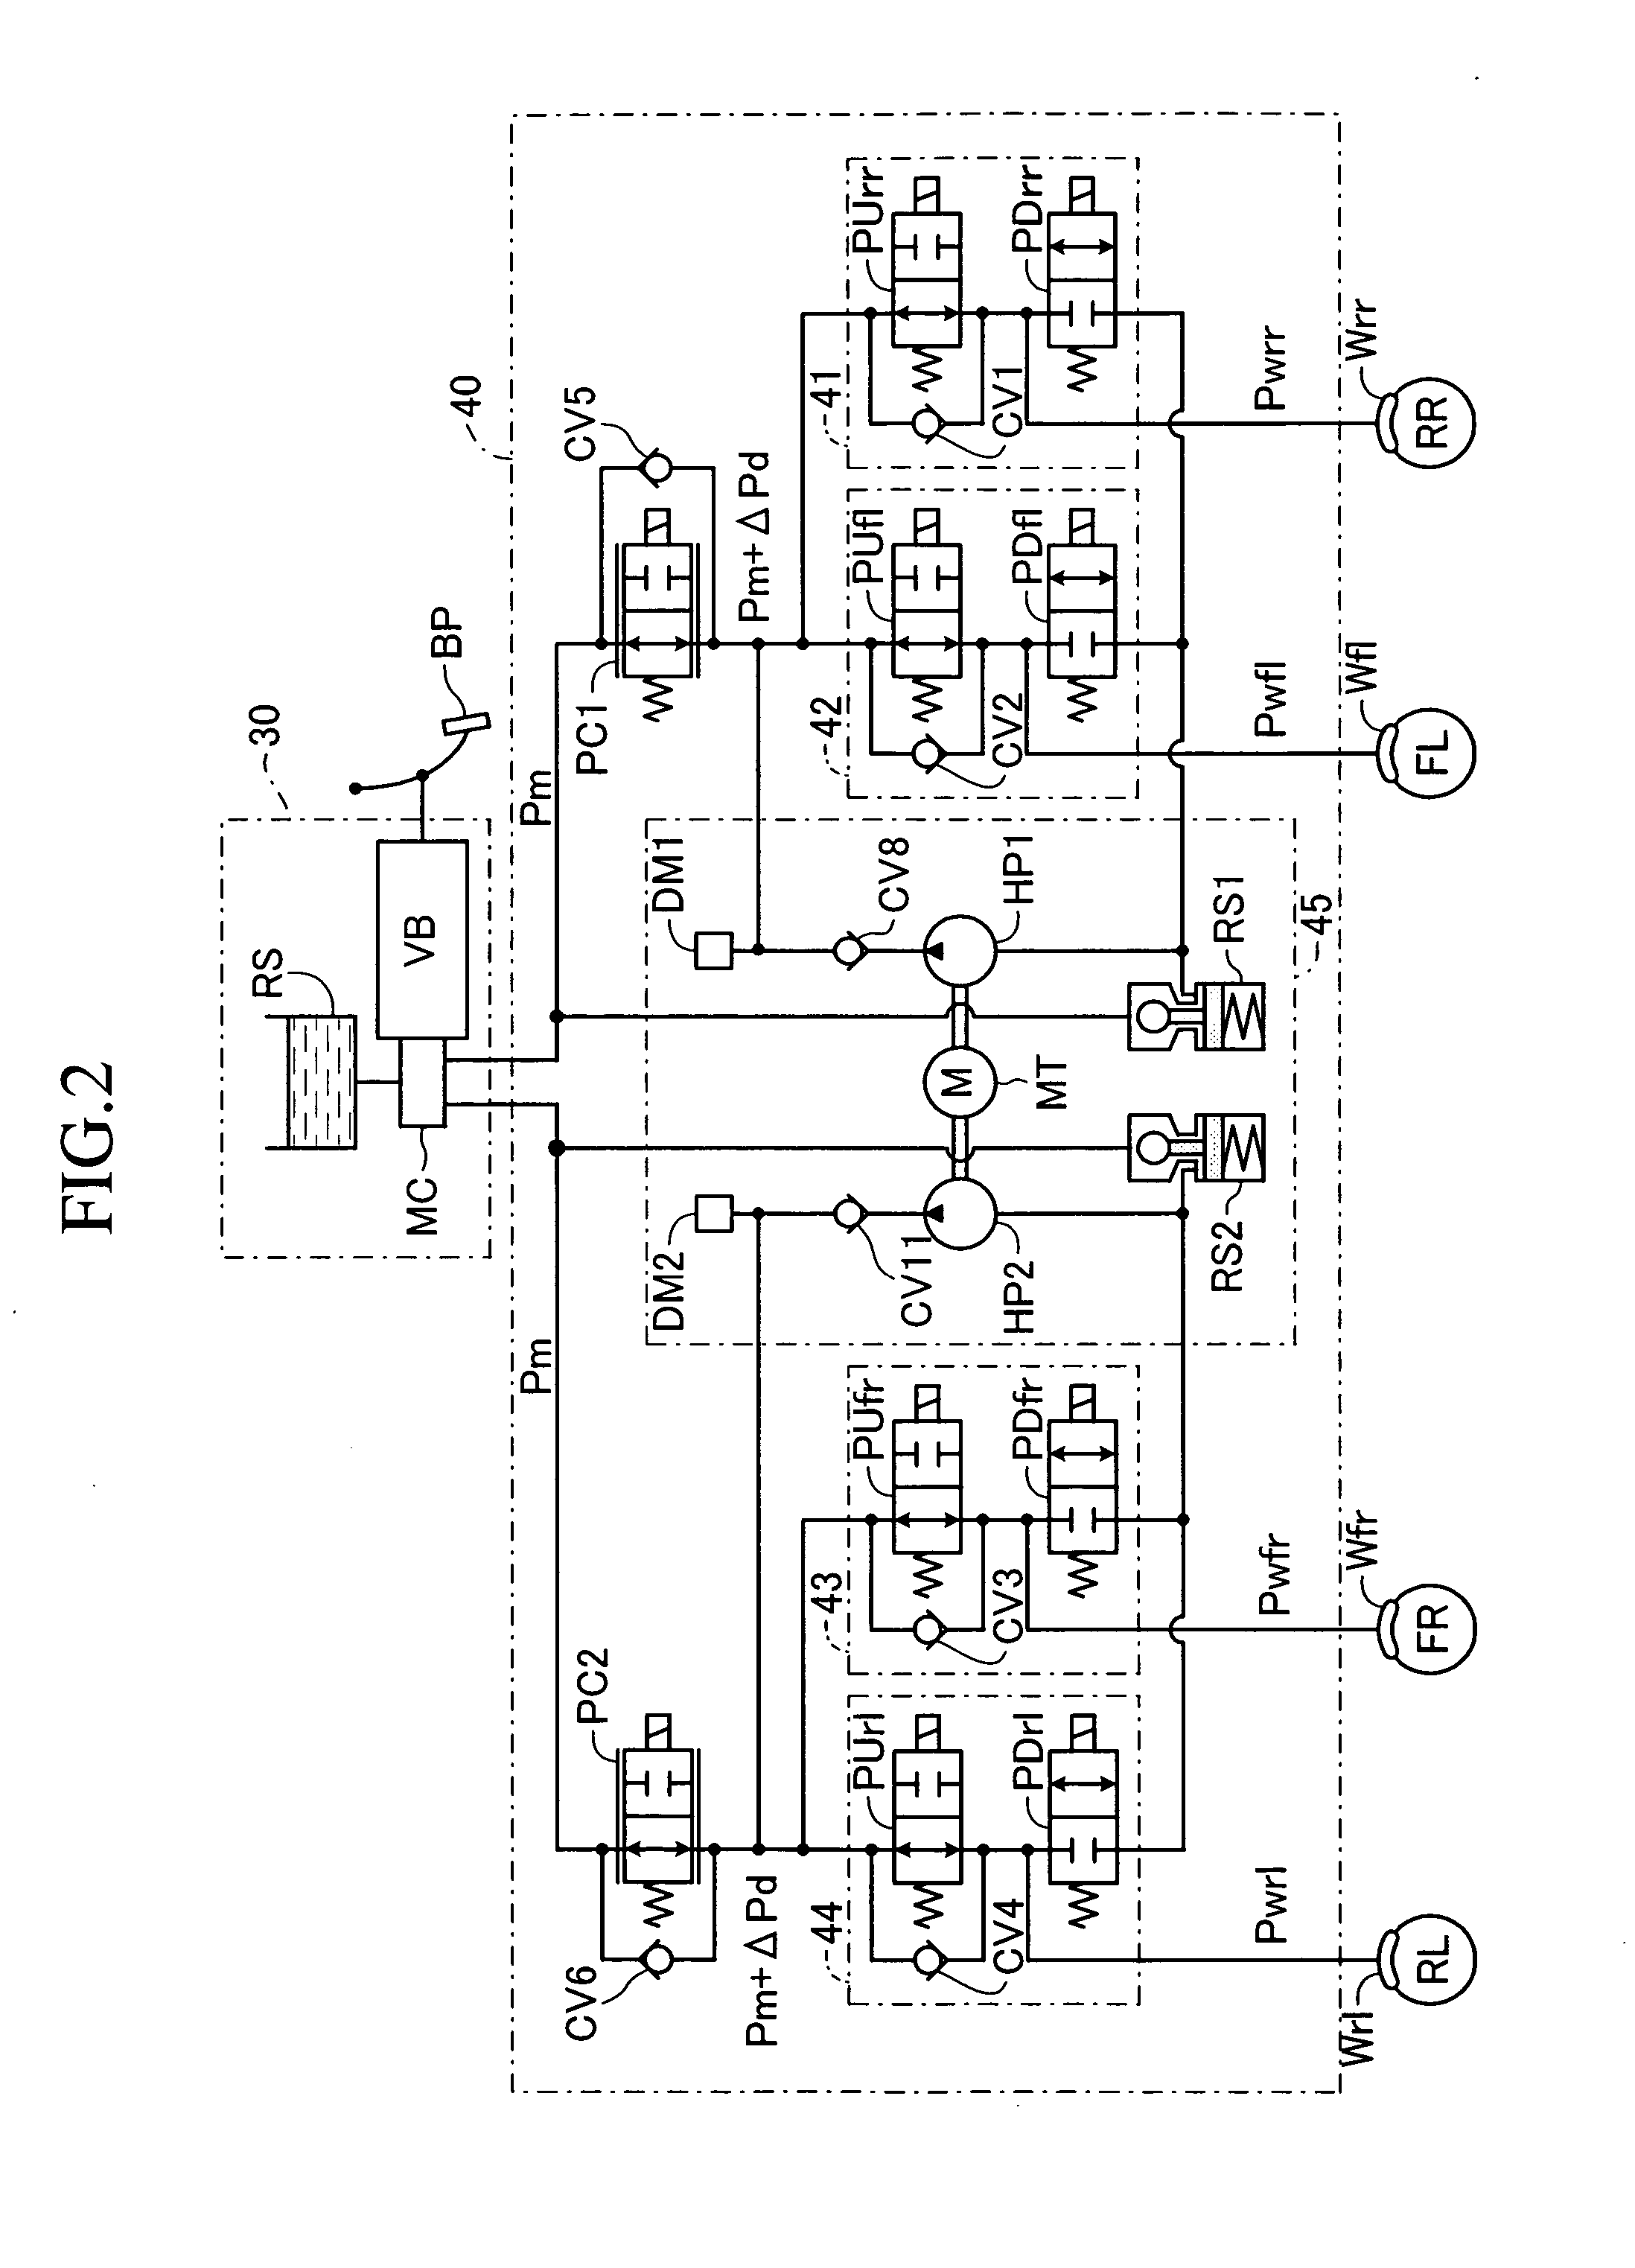 Apparatus for acquiring lateral acceleration at the center of gravity of vehicle, and motion control apparatus for vehicle